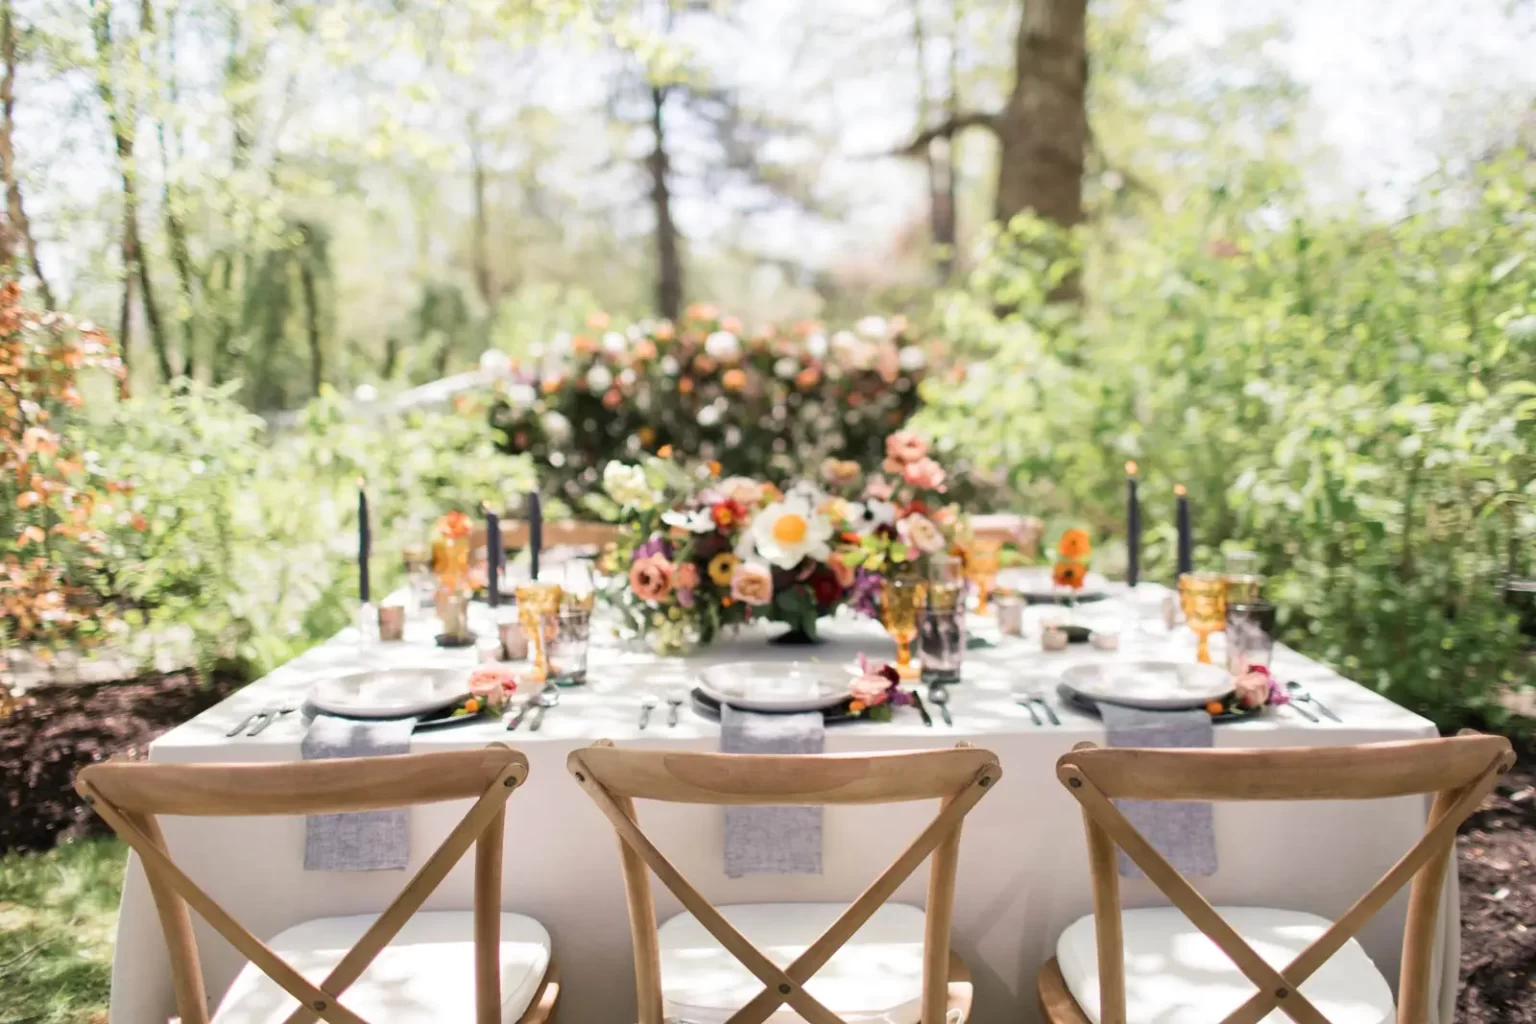 A white tablecloth with place settings and floral arrangements set for an outdoor event, surrounded by greenery and trees. Three wooden chairs are in the foreground.